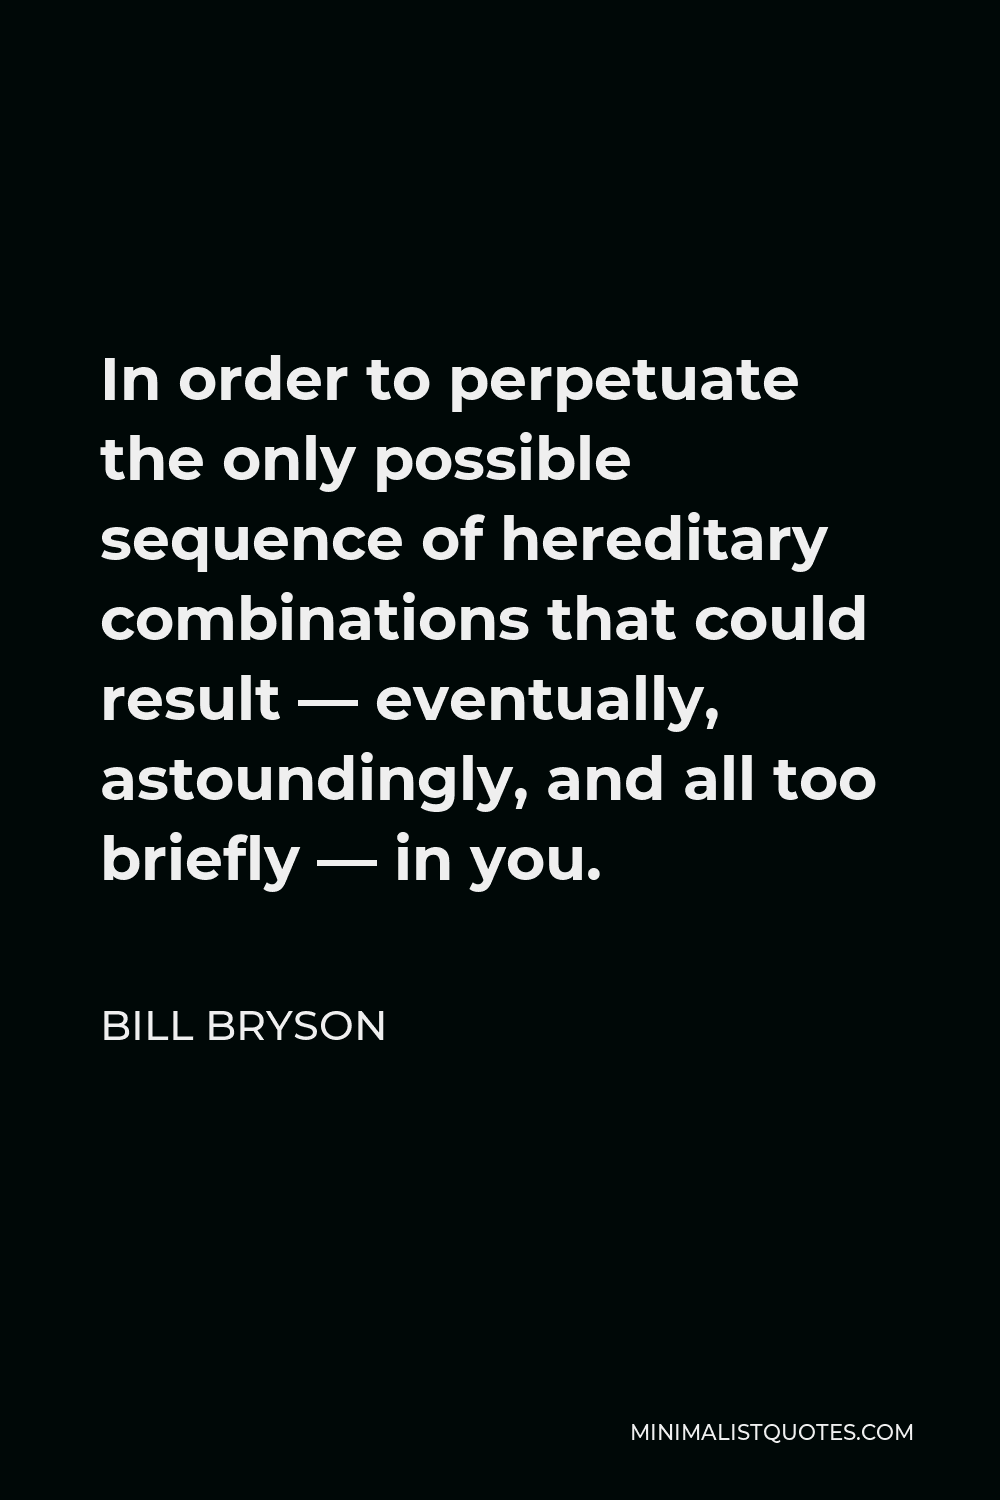 Bill Bryson Quote - In order to perpetuate the only possible sequence of hereditary combinations that could result — eventually, astoundingly, and all too briefly — in you.